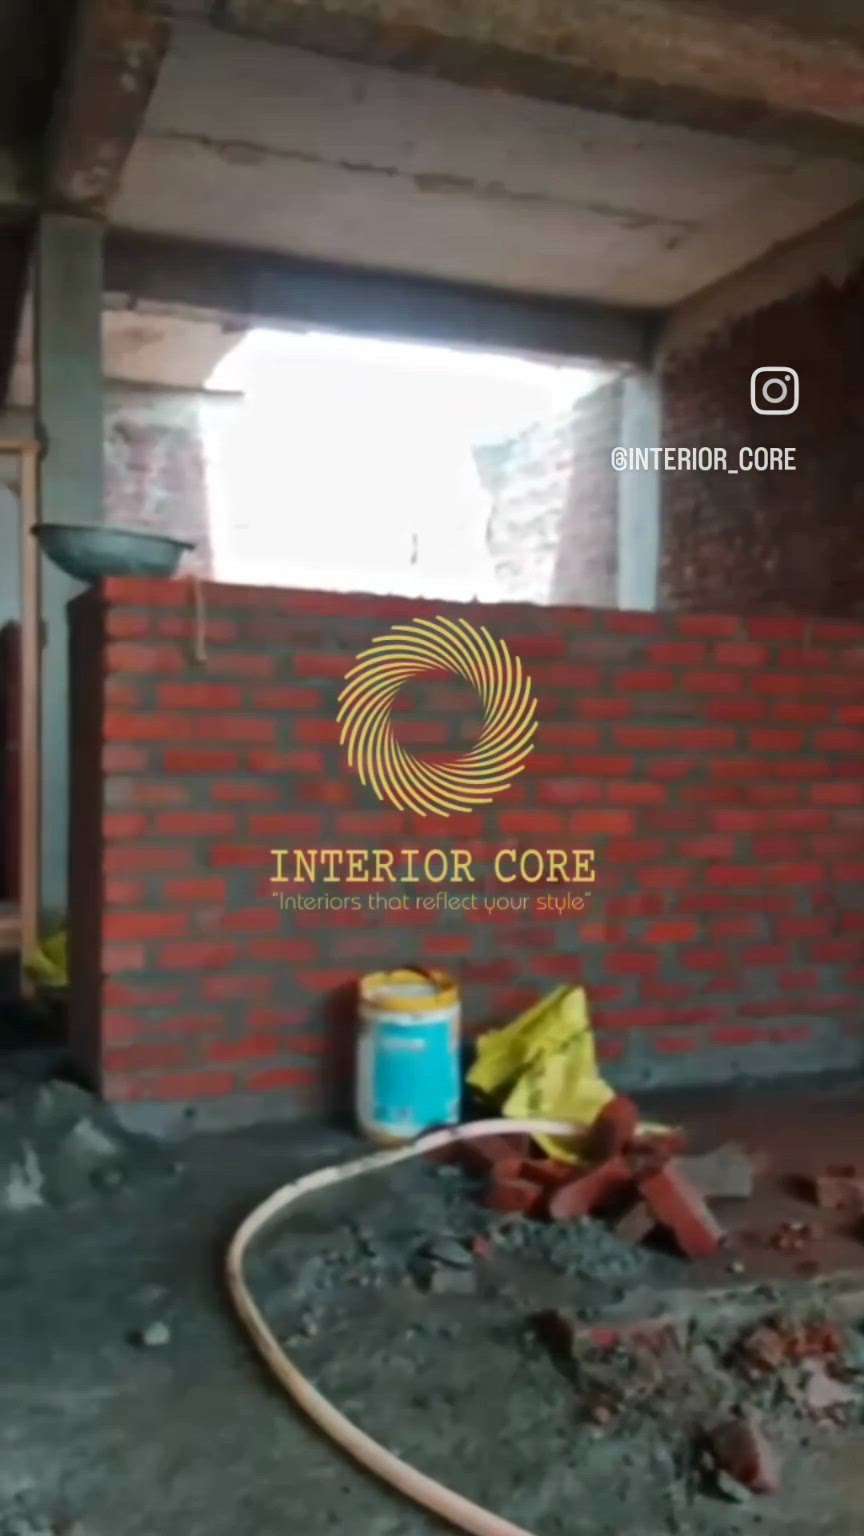 Chunnai work is going on. 
If you are interested in construction call now - 9891830873
web- www.interiorcore.in

#HouseConstruction #Buildingconstruction #chunnaiandplaster 
#InteriorDesigner 
Turnkey project